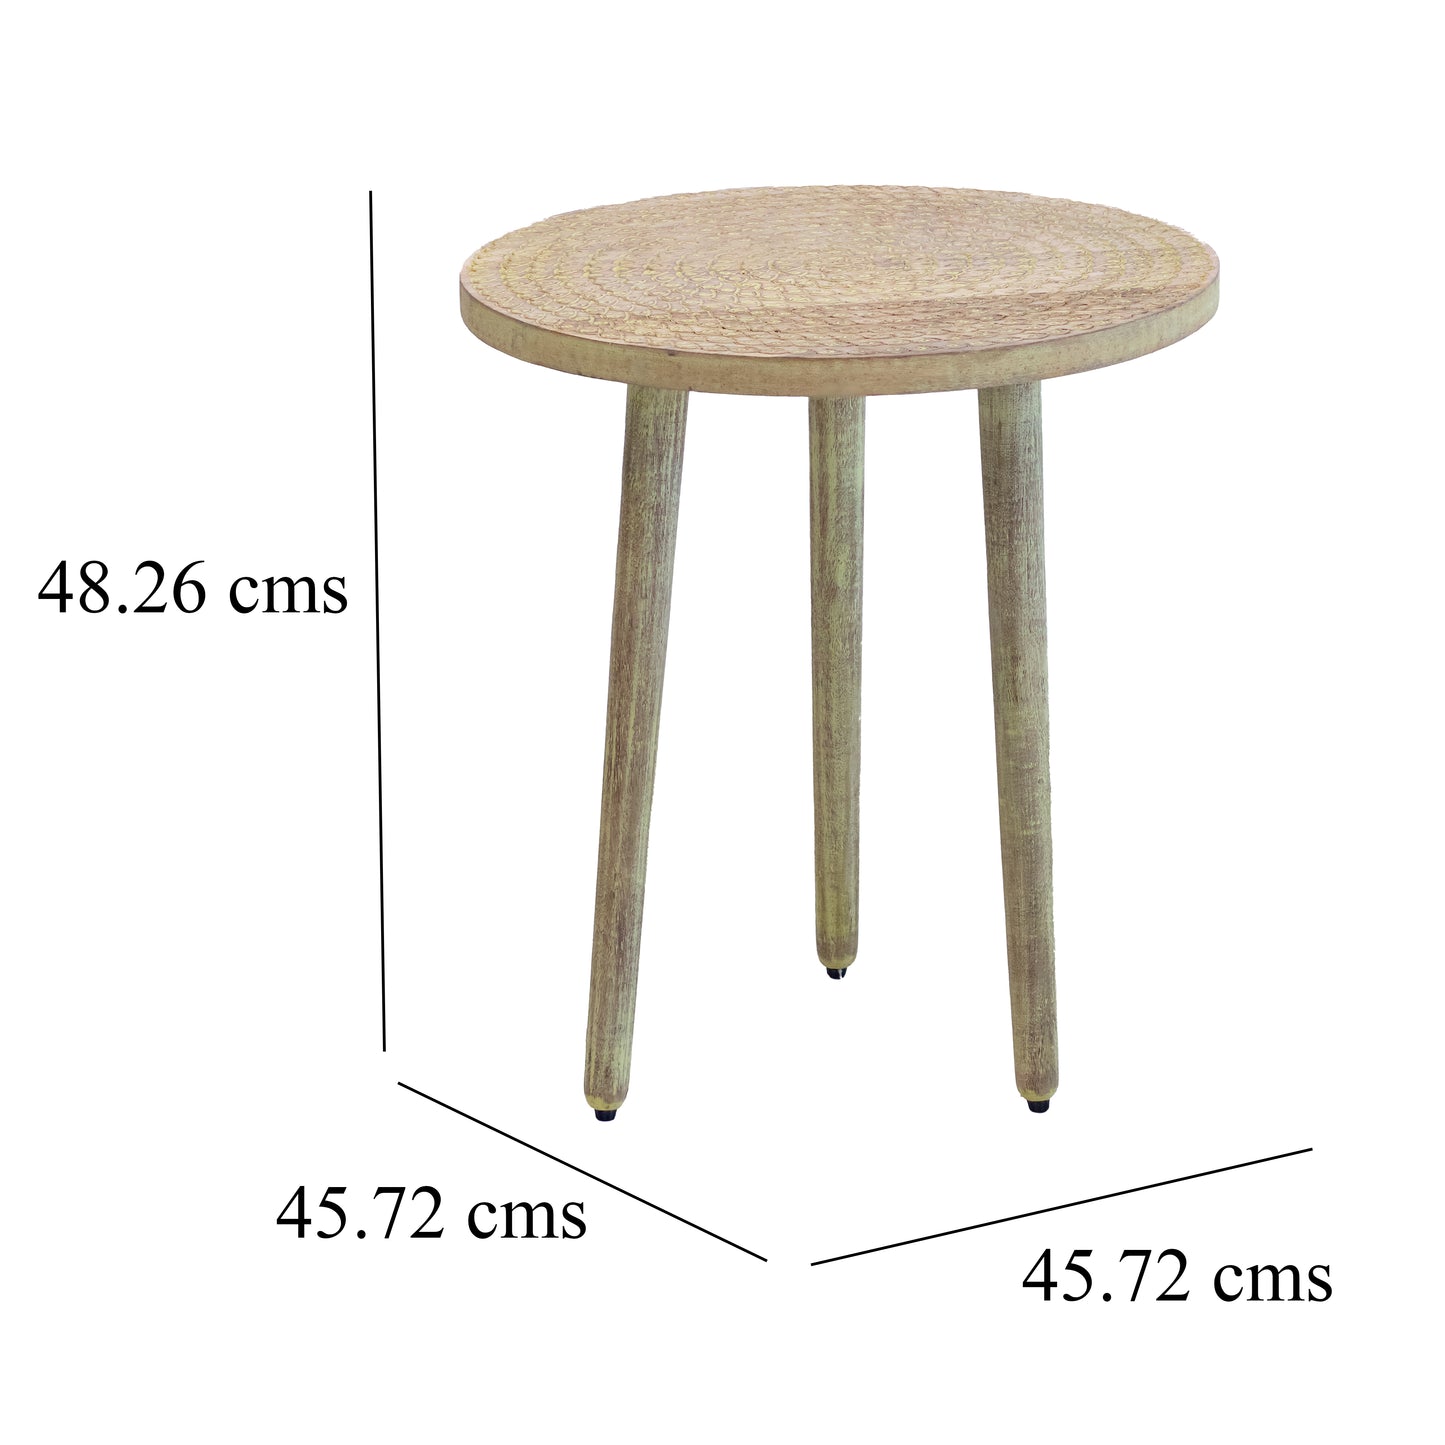 Kezevel Wooden Decorative Accent Table - Round Brown Yellow Handcrafted Vintage End Table, Bedside Table, Side Stand, Stool, Size 45.72X45.72X48.26 CM